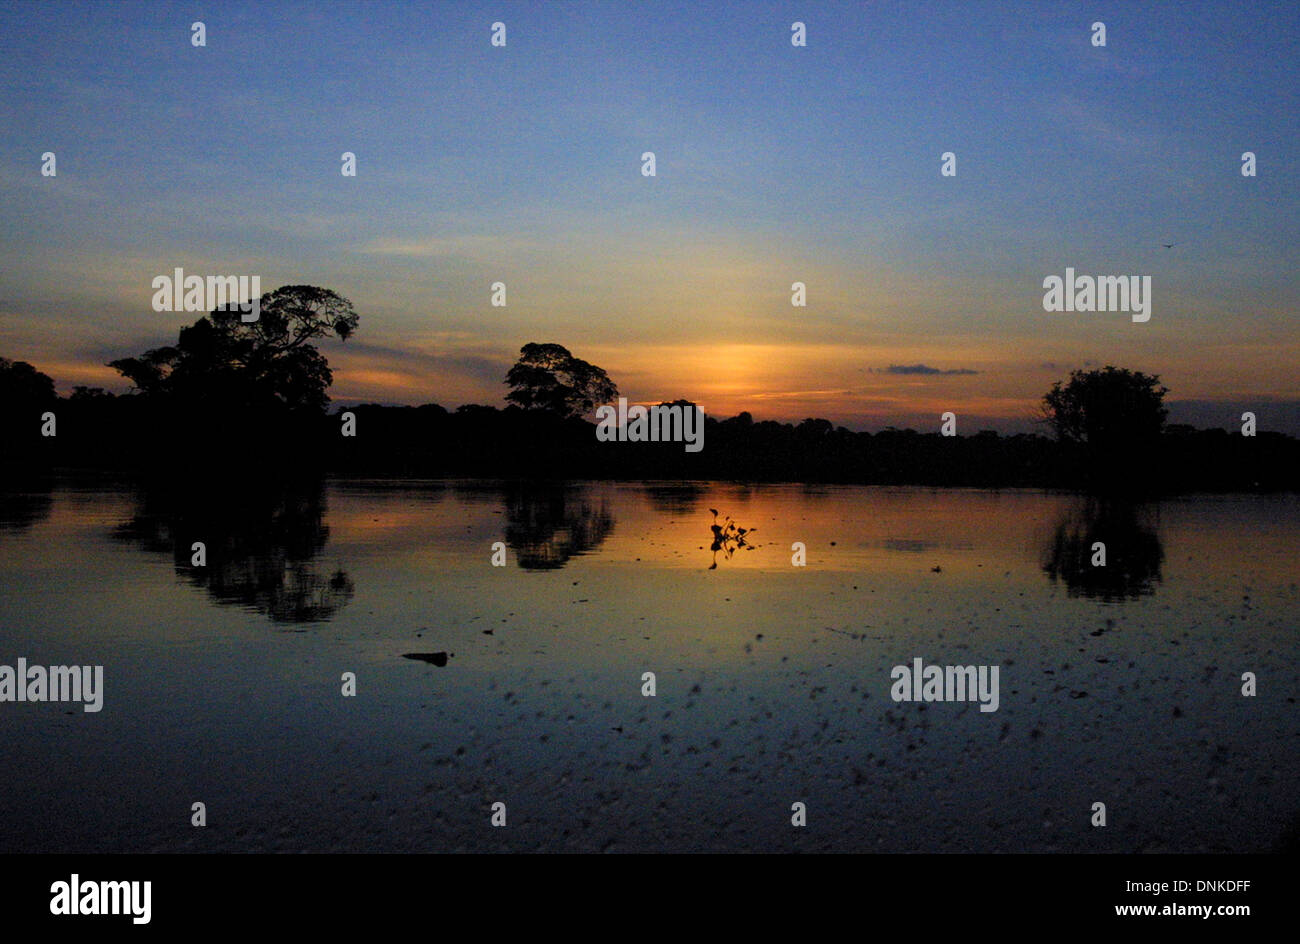 The Portuguesa River reflects the sunset in Venezuela's Los LLanos plains in Guarico State, Sept. 14, 2002. Stock Photo